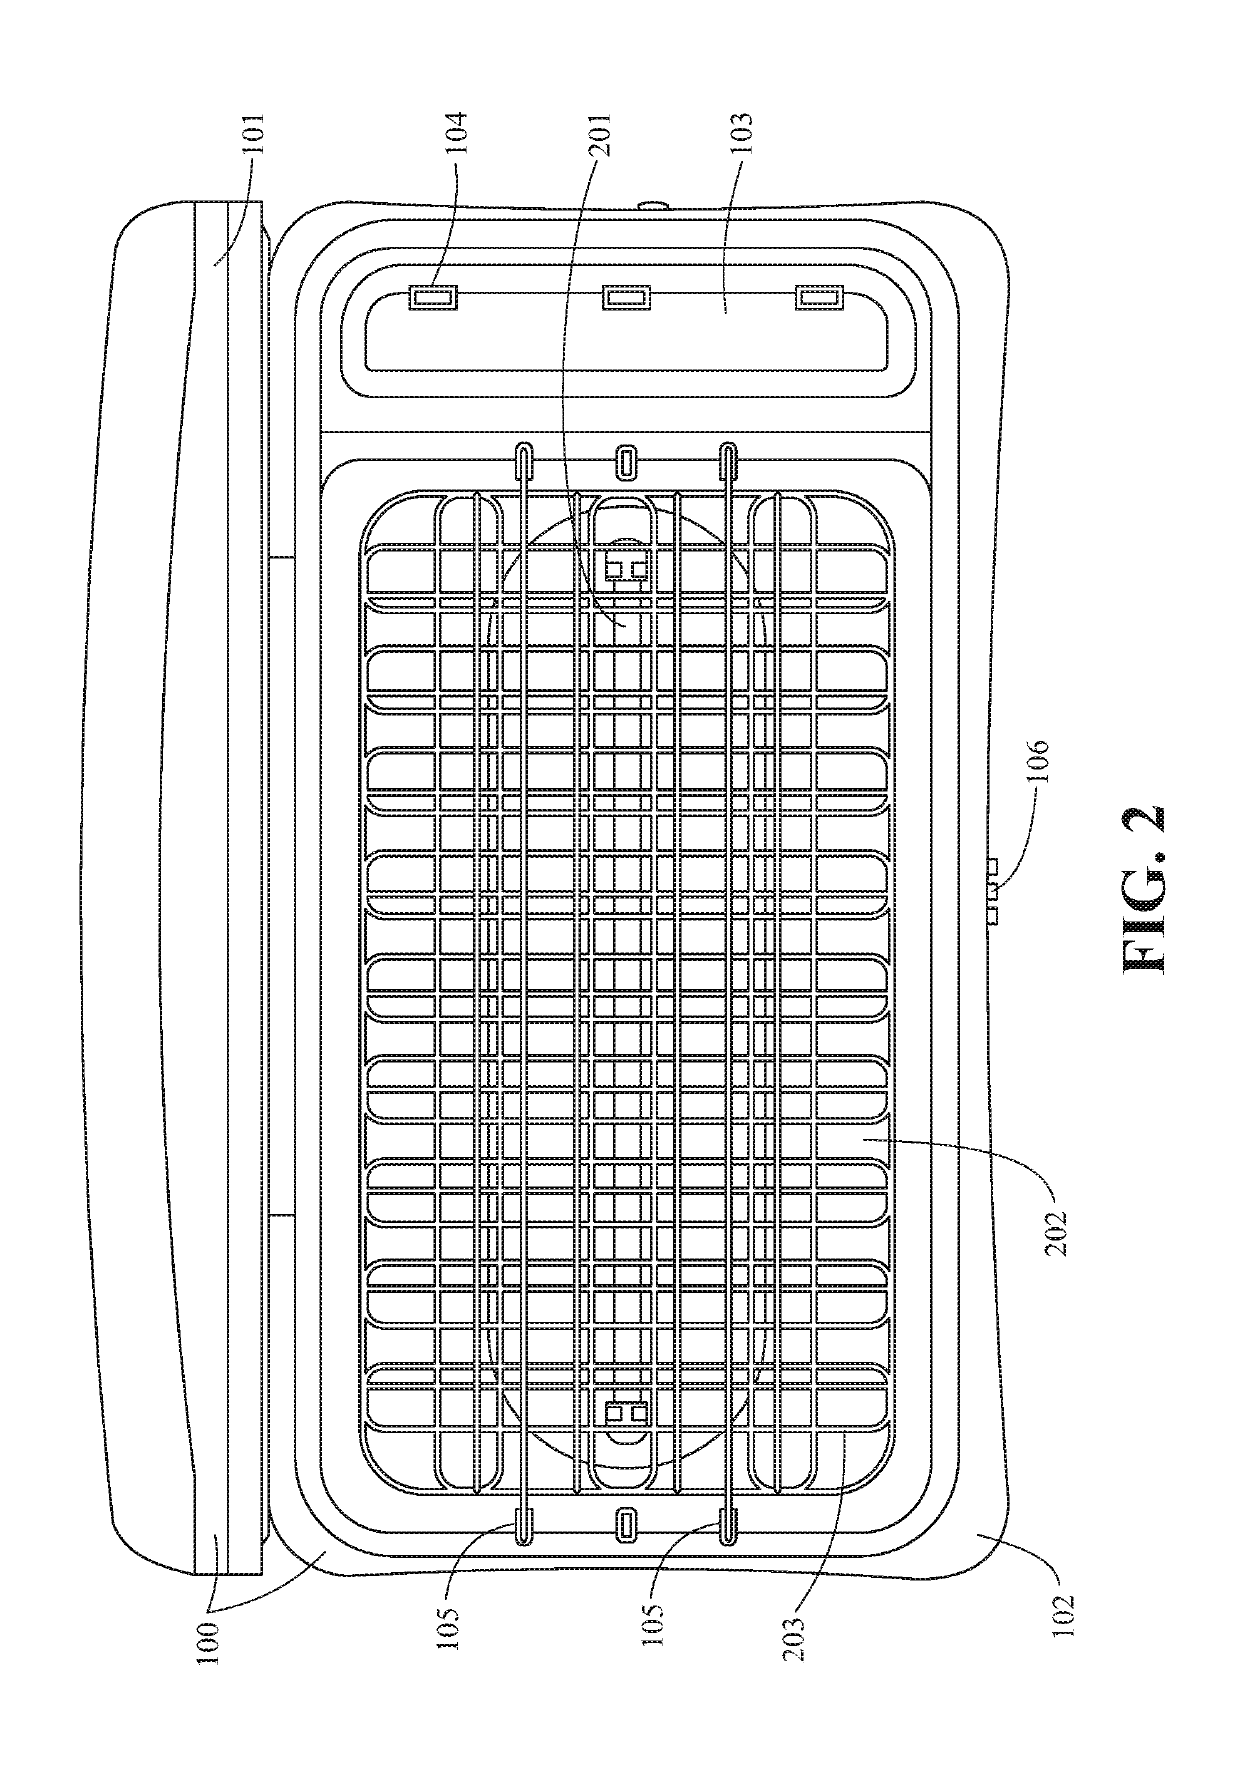 System and device for sanitizing personal use items